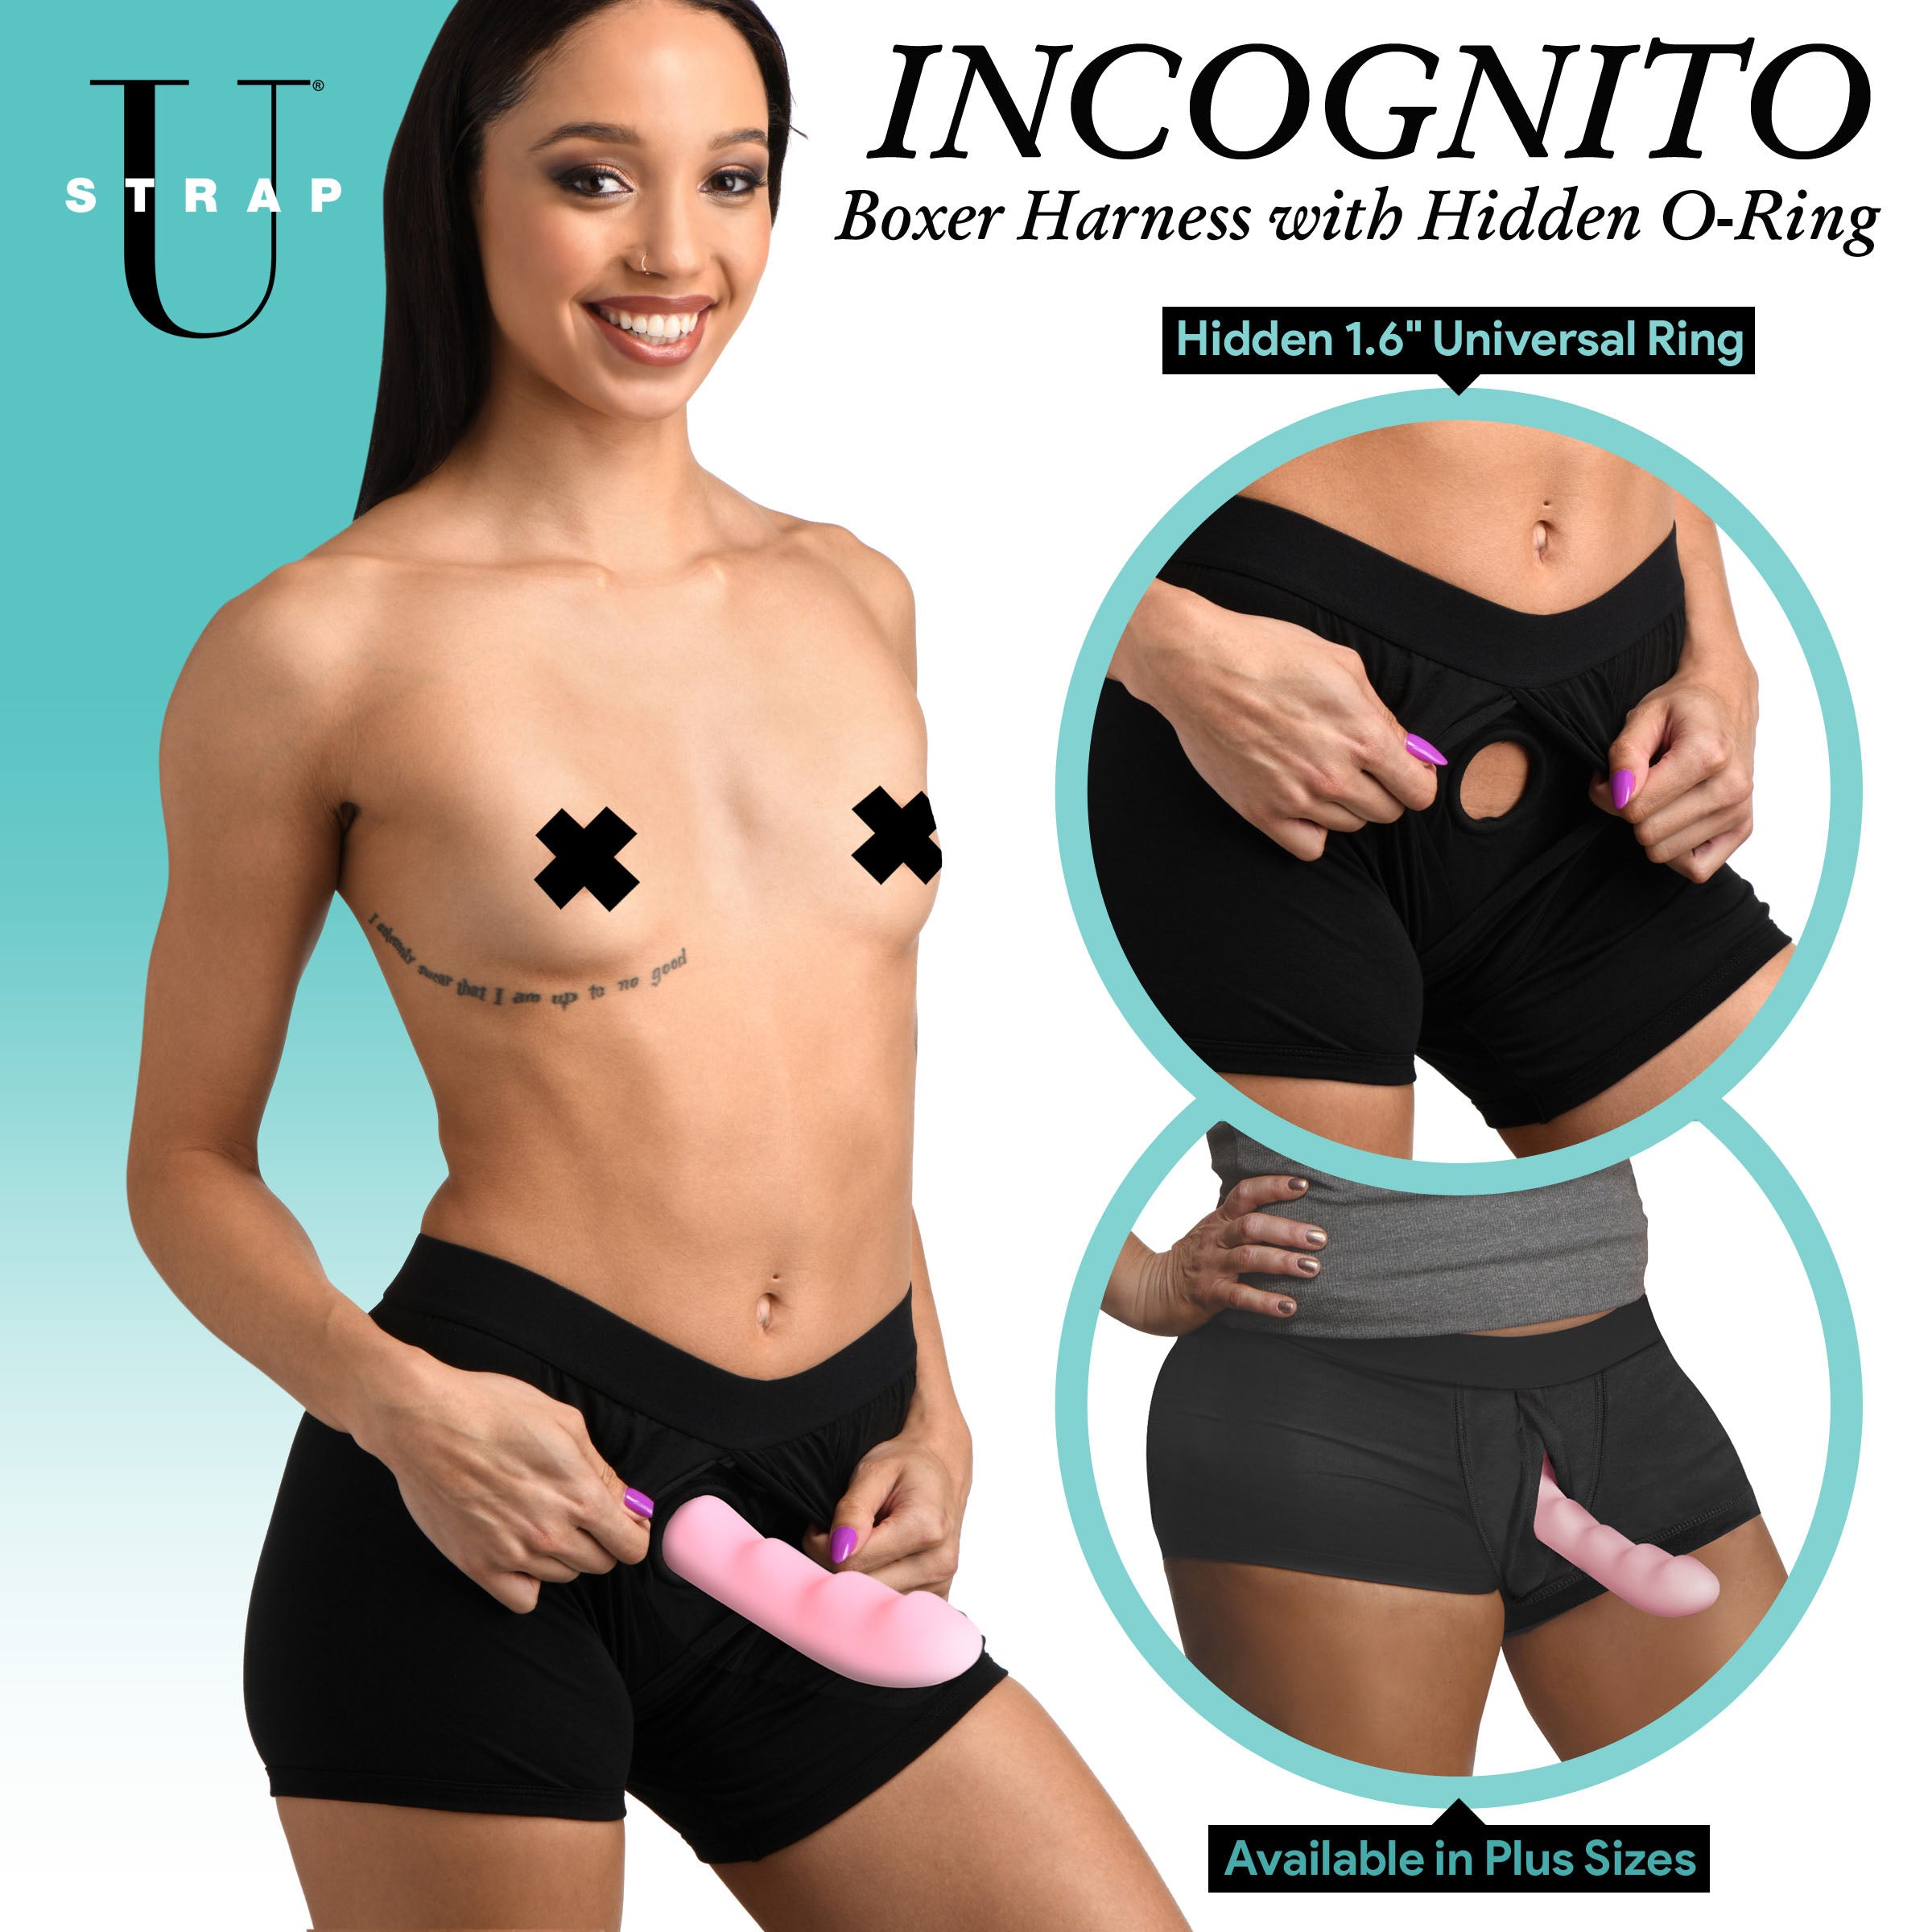 Incognito Boxer Harness with Hidden O-Ring Large/X-Large